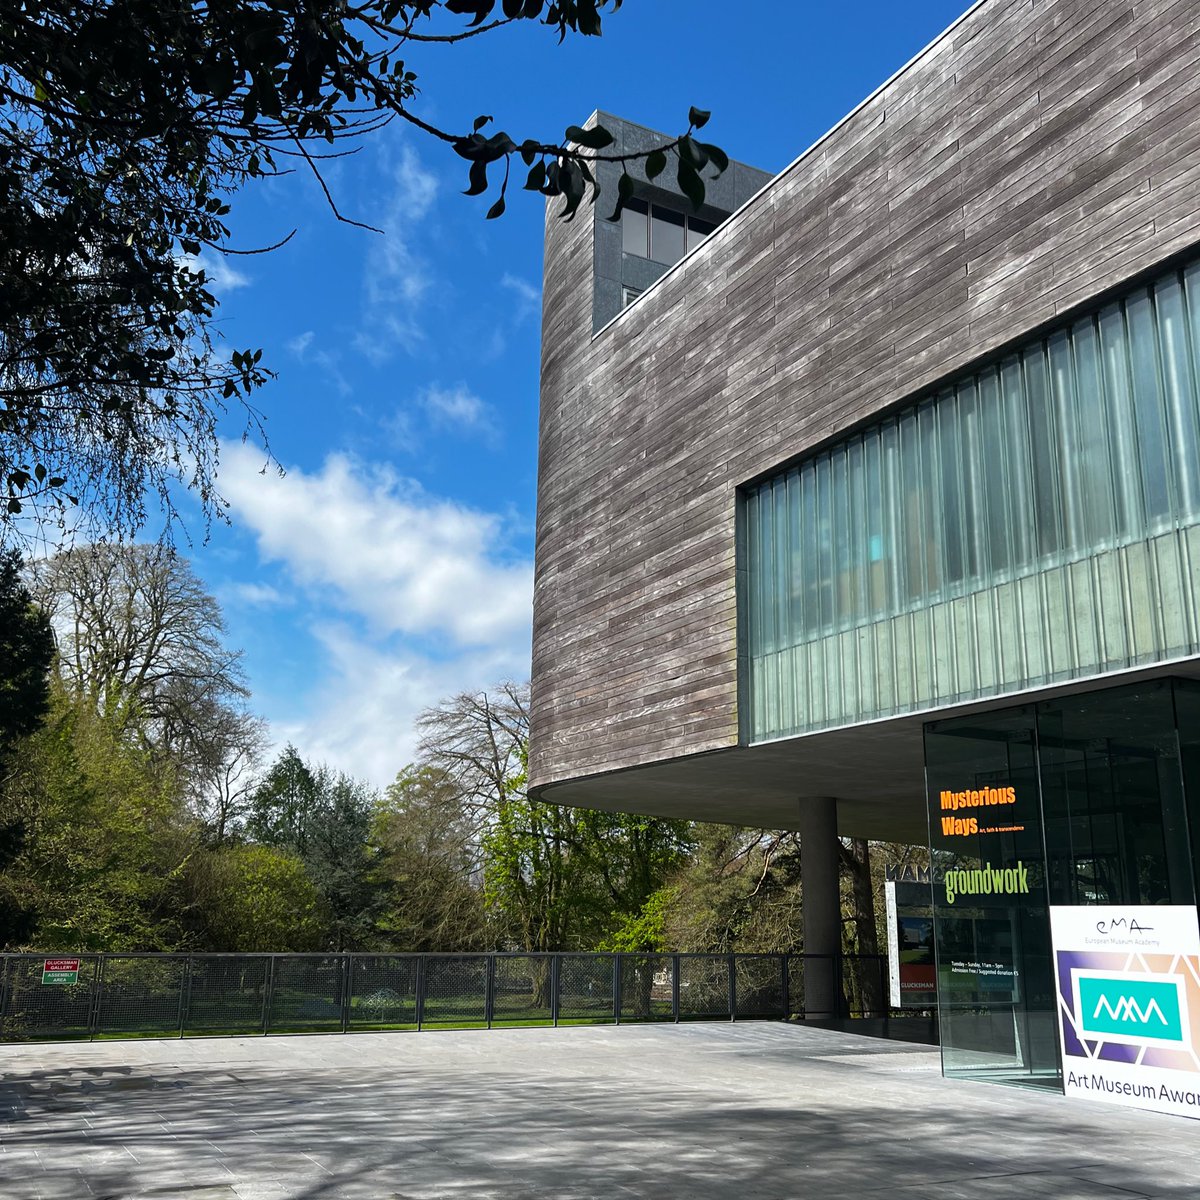 Good morning, we are now open for the day ☀️ Come in and view our exhibitions Mysterious Ways and Groundworks from 11-5 today! glucksman.org